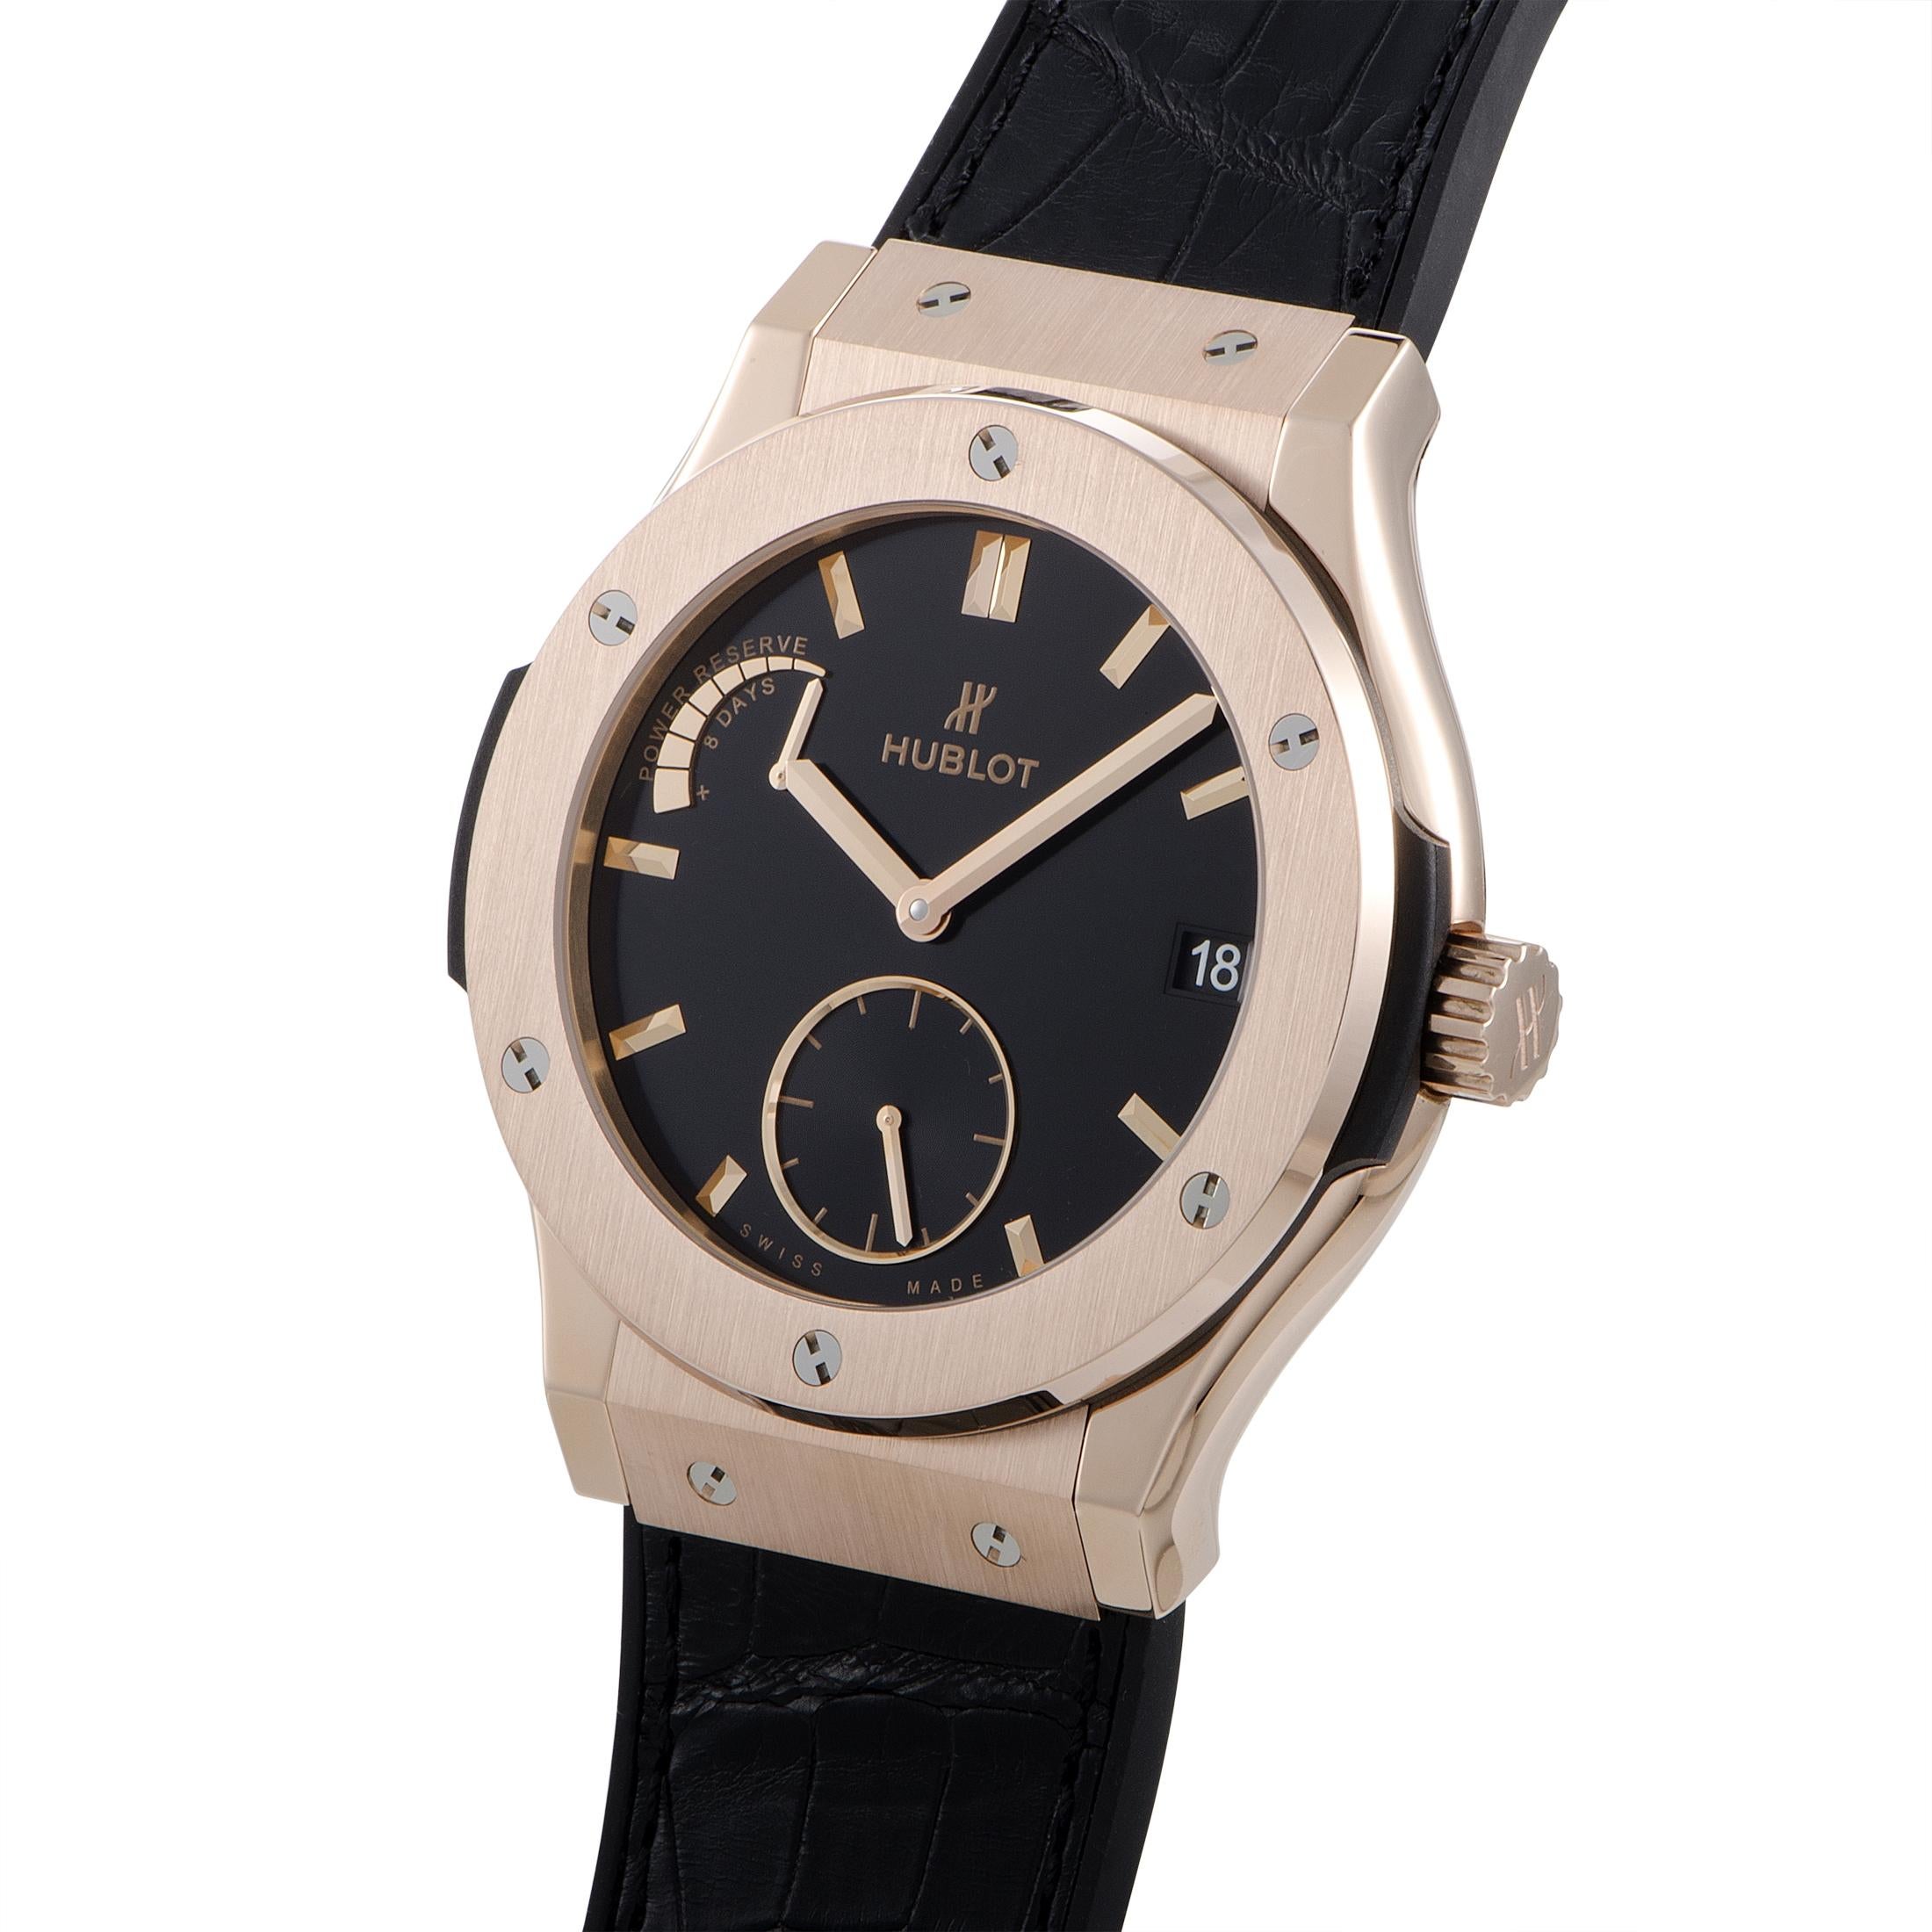 The Hublot Classic Fusion Power Reserve 8 Days King Gold 45 mm, reference number 516.OX.1480.LR, is a member of the iconic “Classic Fusion” collection.

This timepiece is presented with a case made of 18K King gold that has a diameter of 45 mm. The